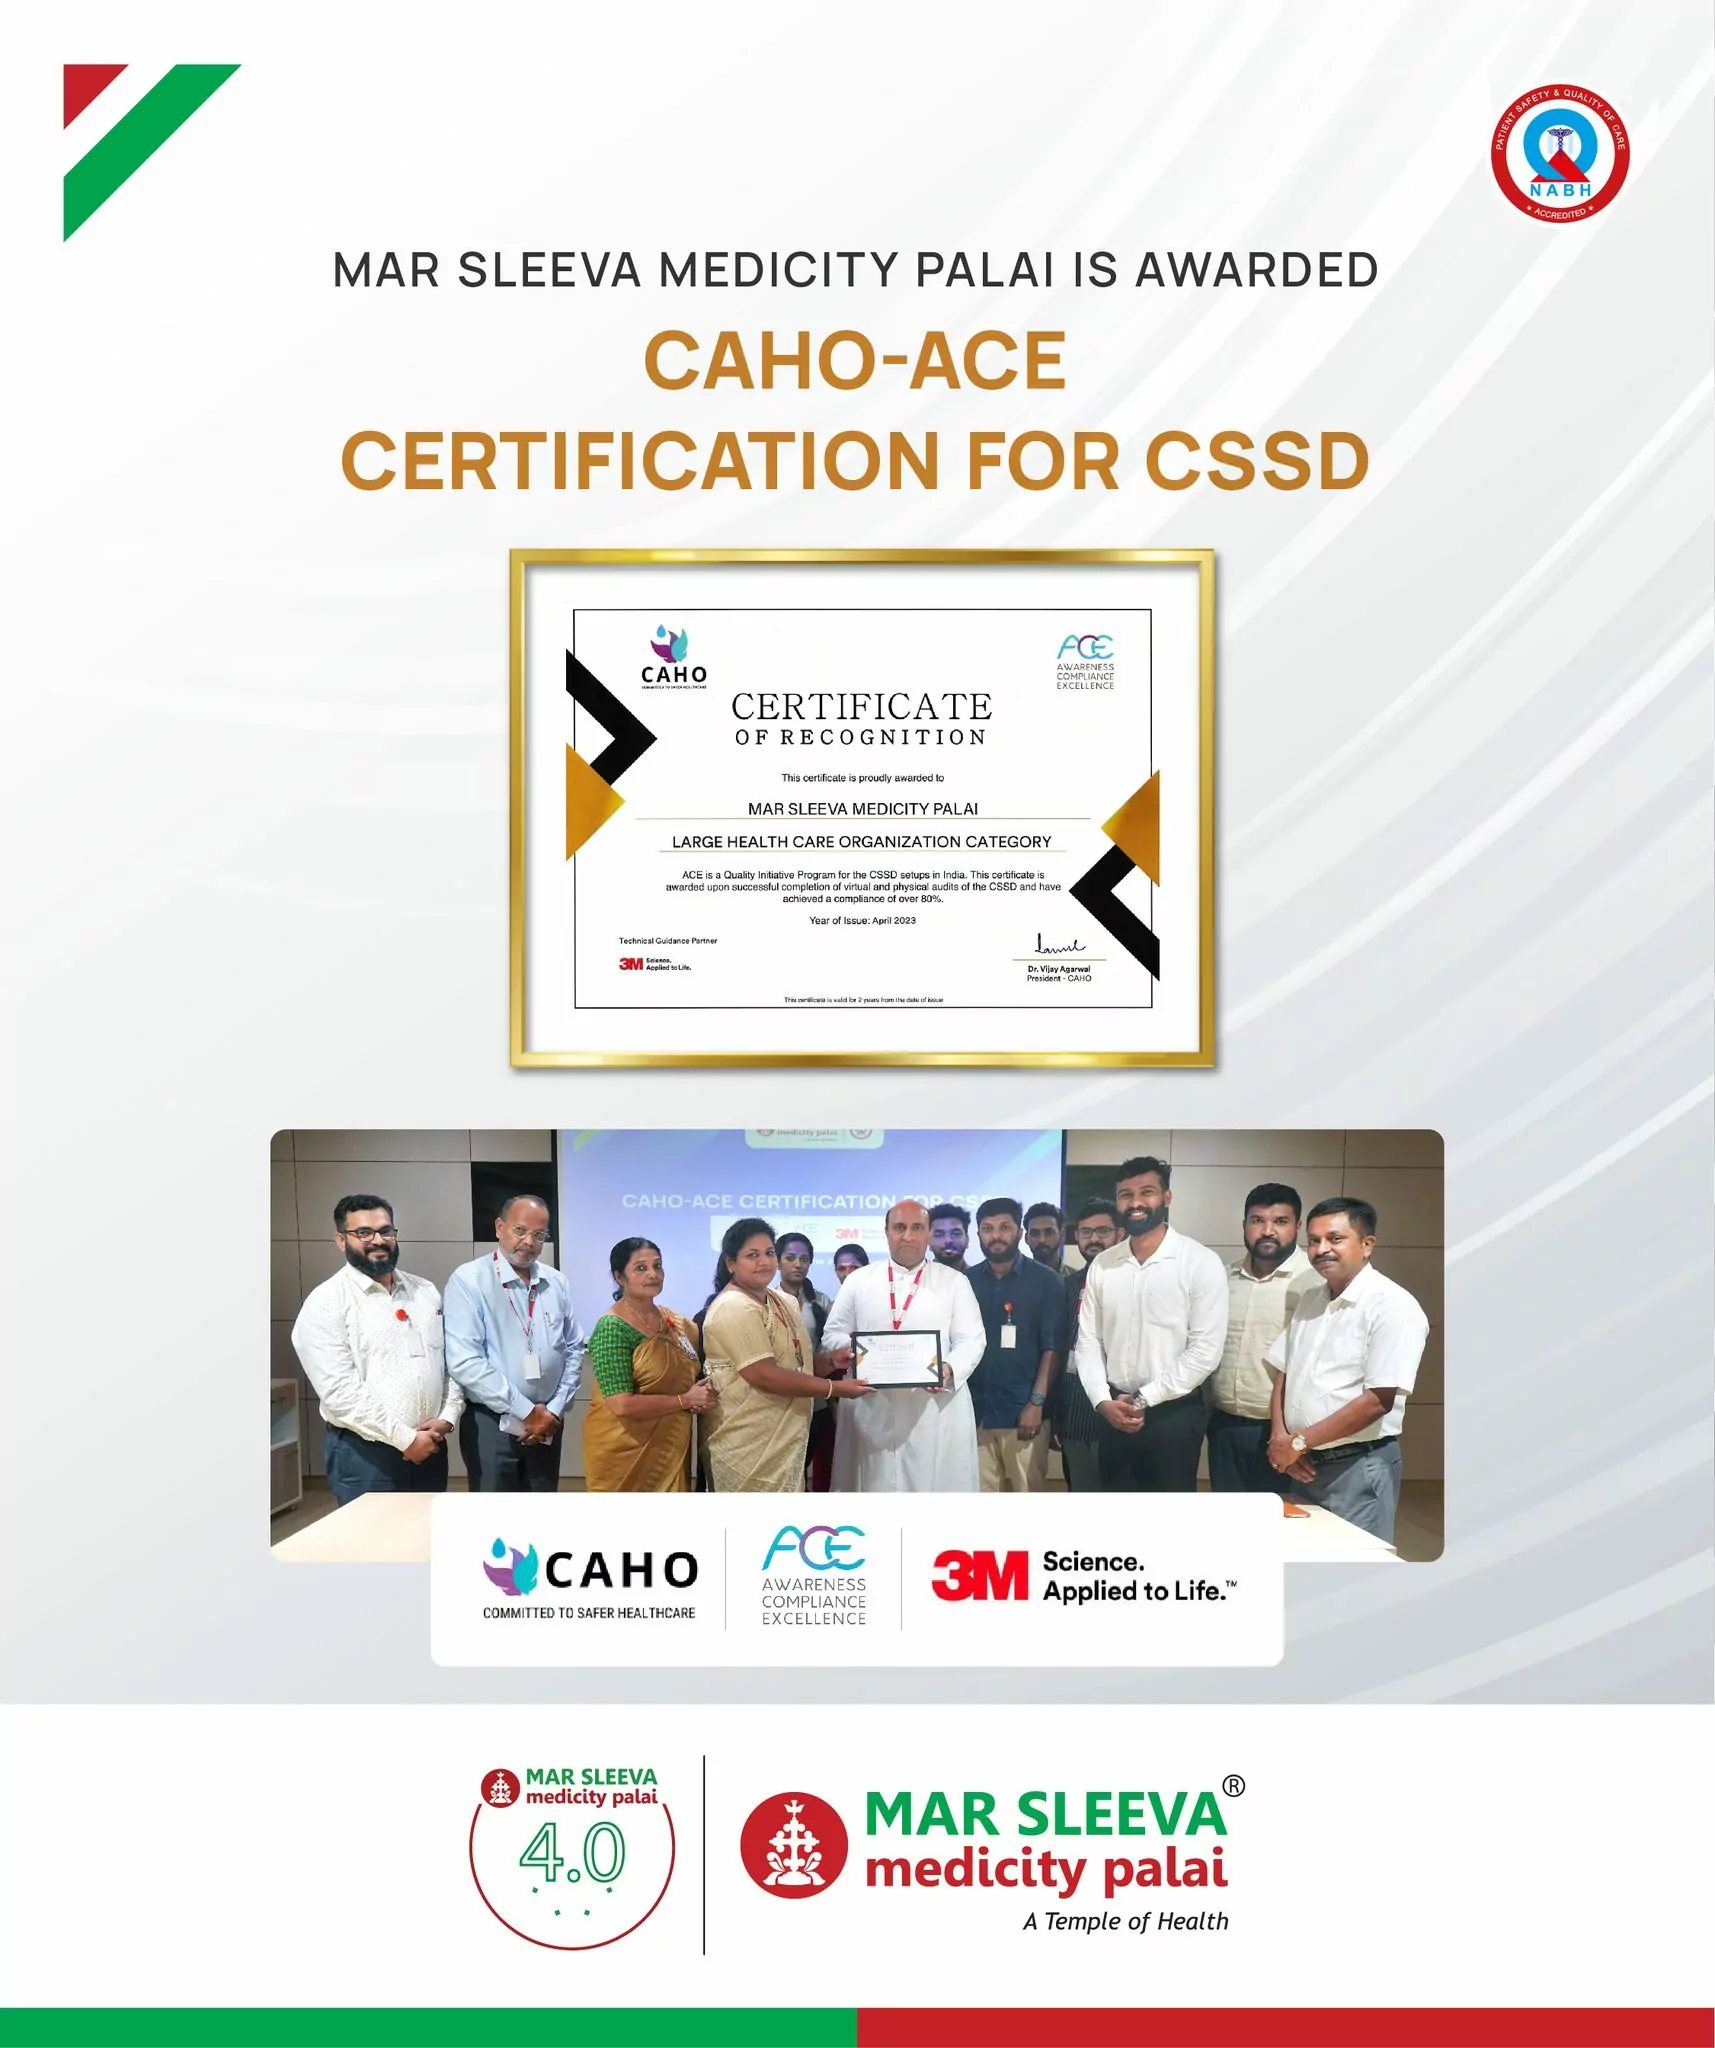 CAHO-ACE Certification